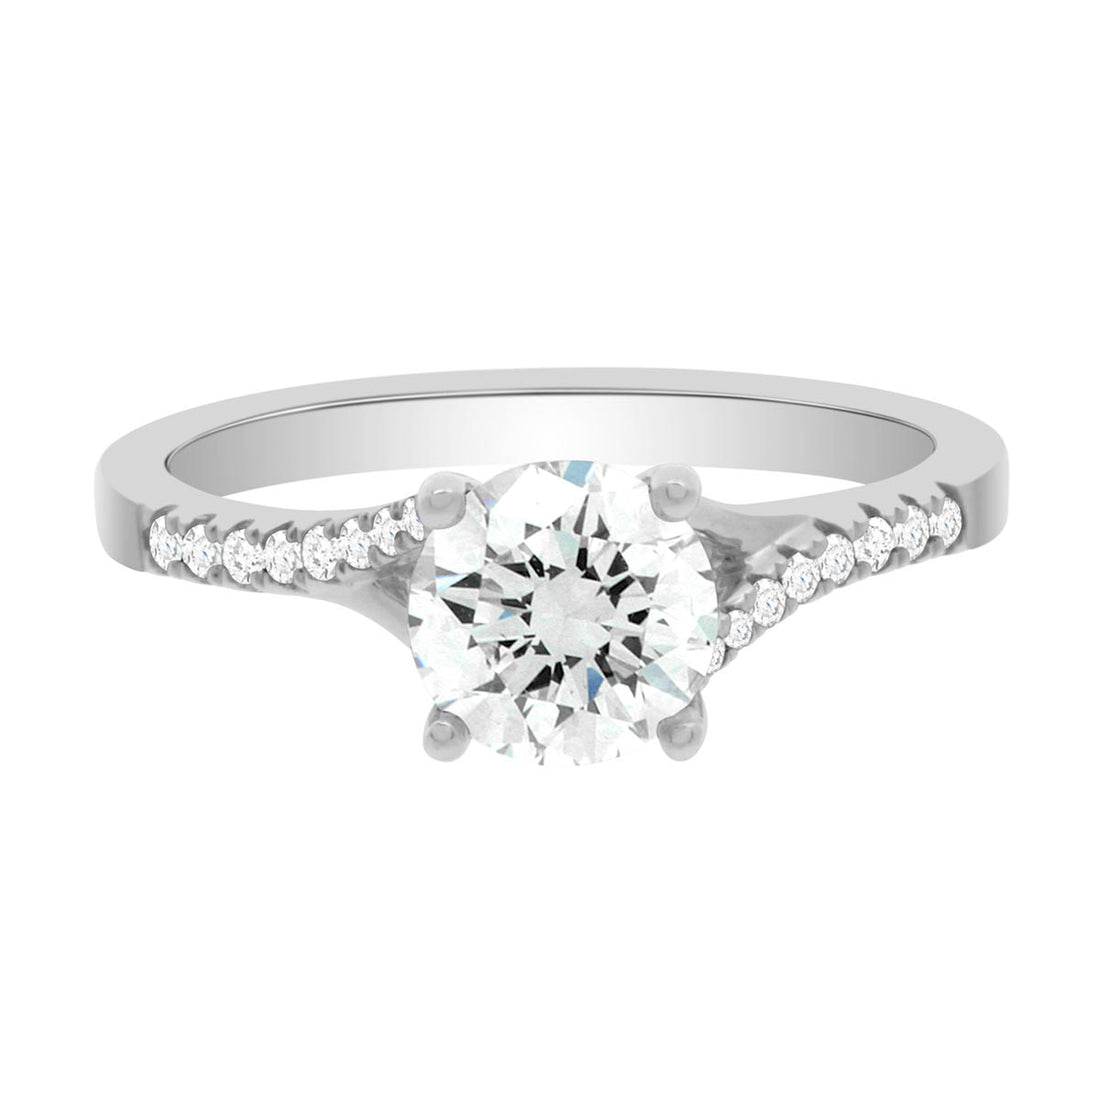 Crossover Solitaire Ring made from platinum